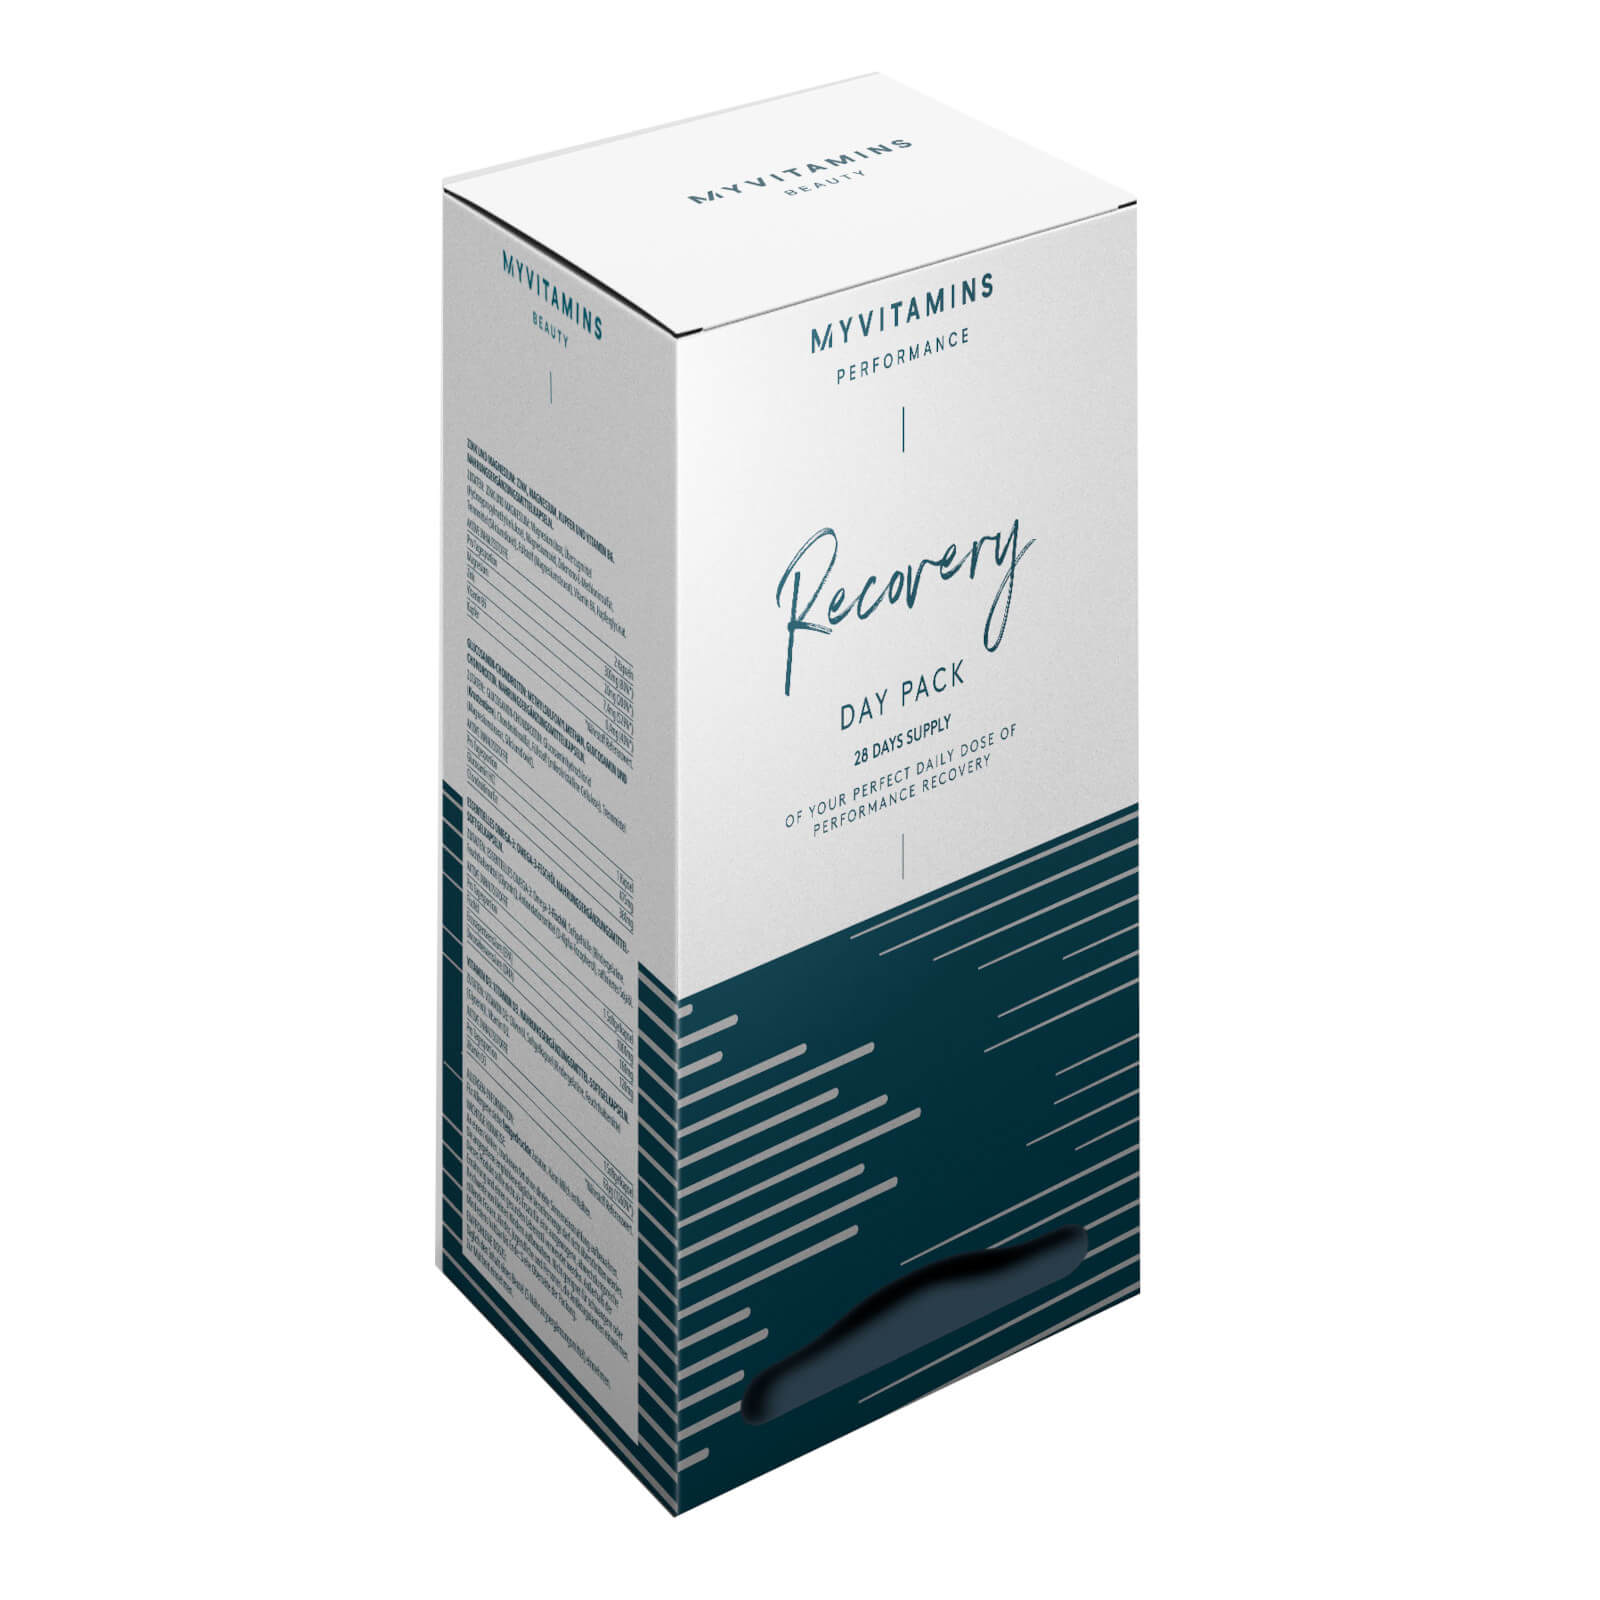 Beauty Daypack – Recovery - 28servings